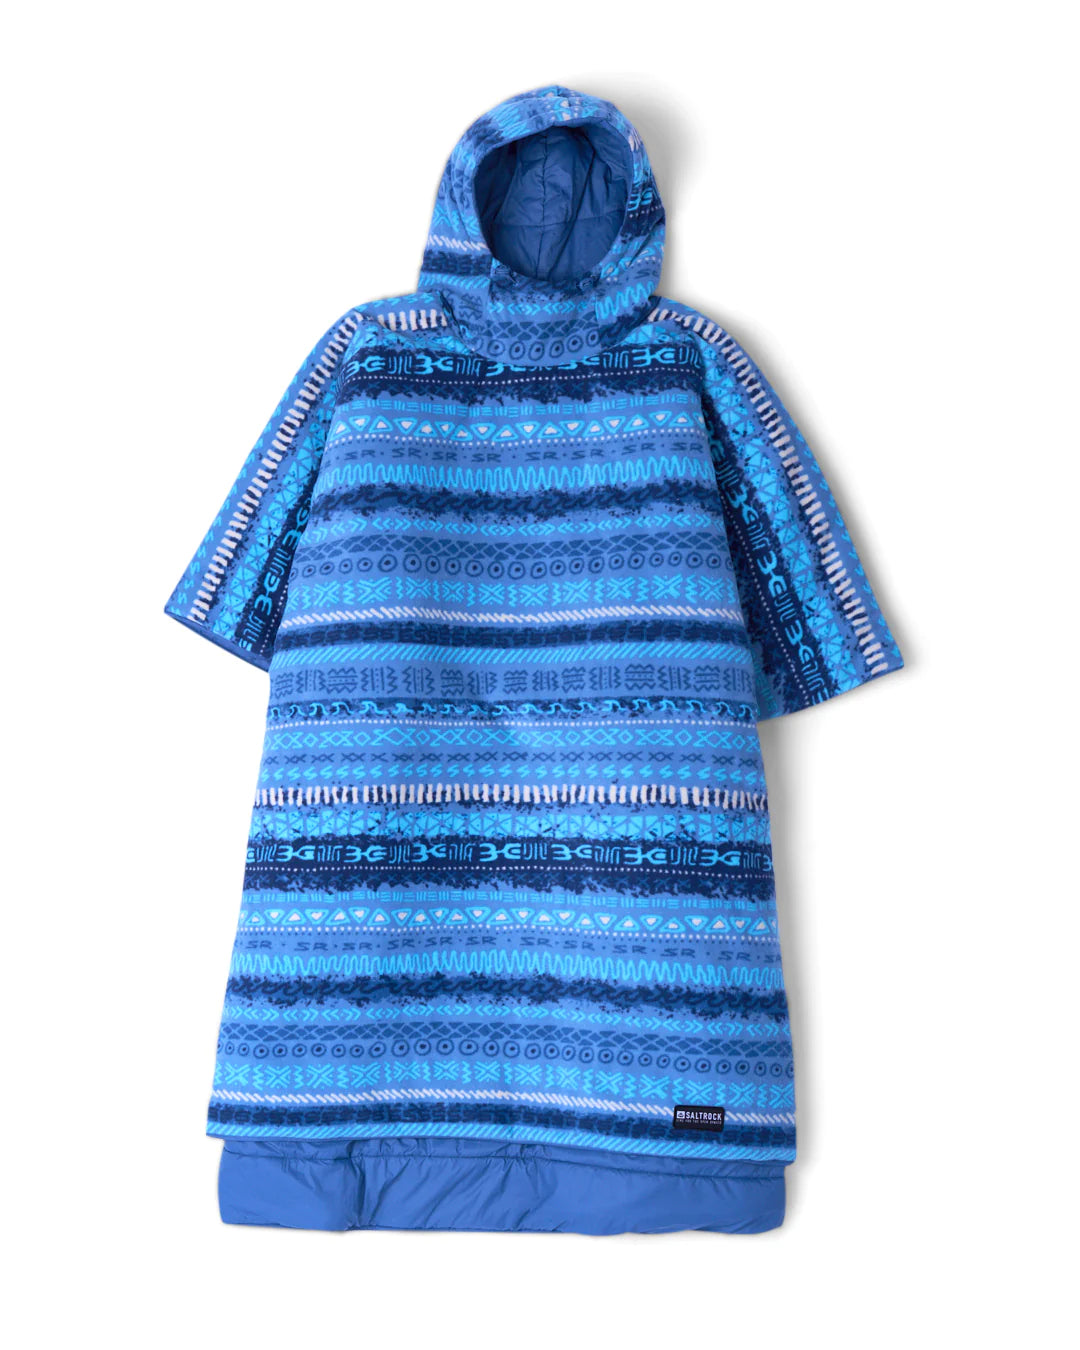 Saltrock Marks - Unisex Recycled Reversible Poncho - Blue